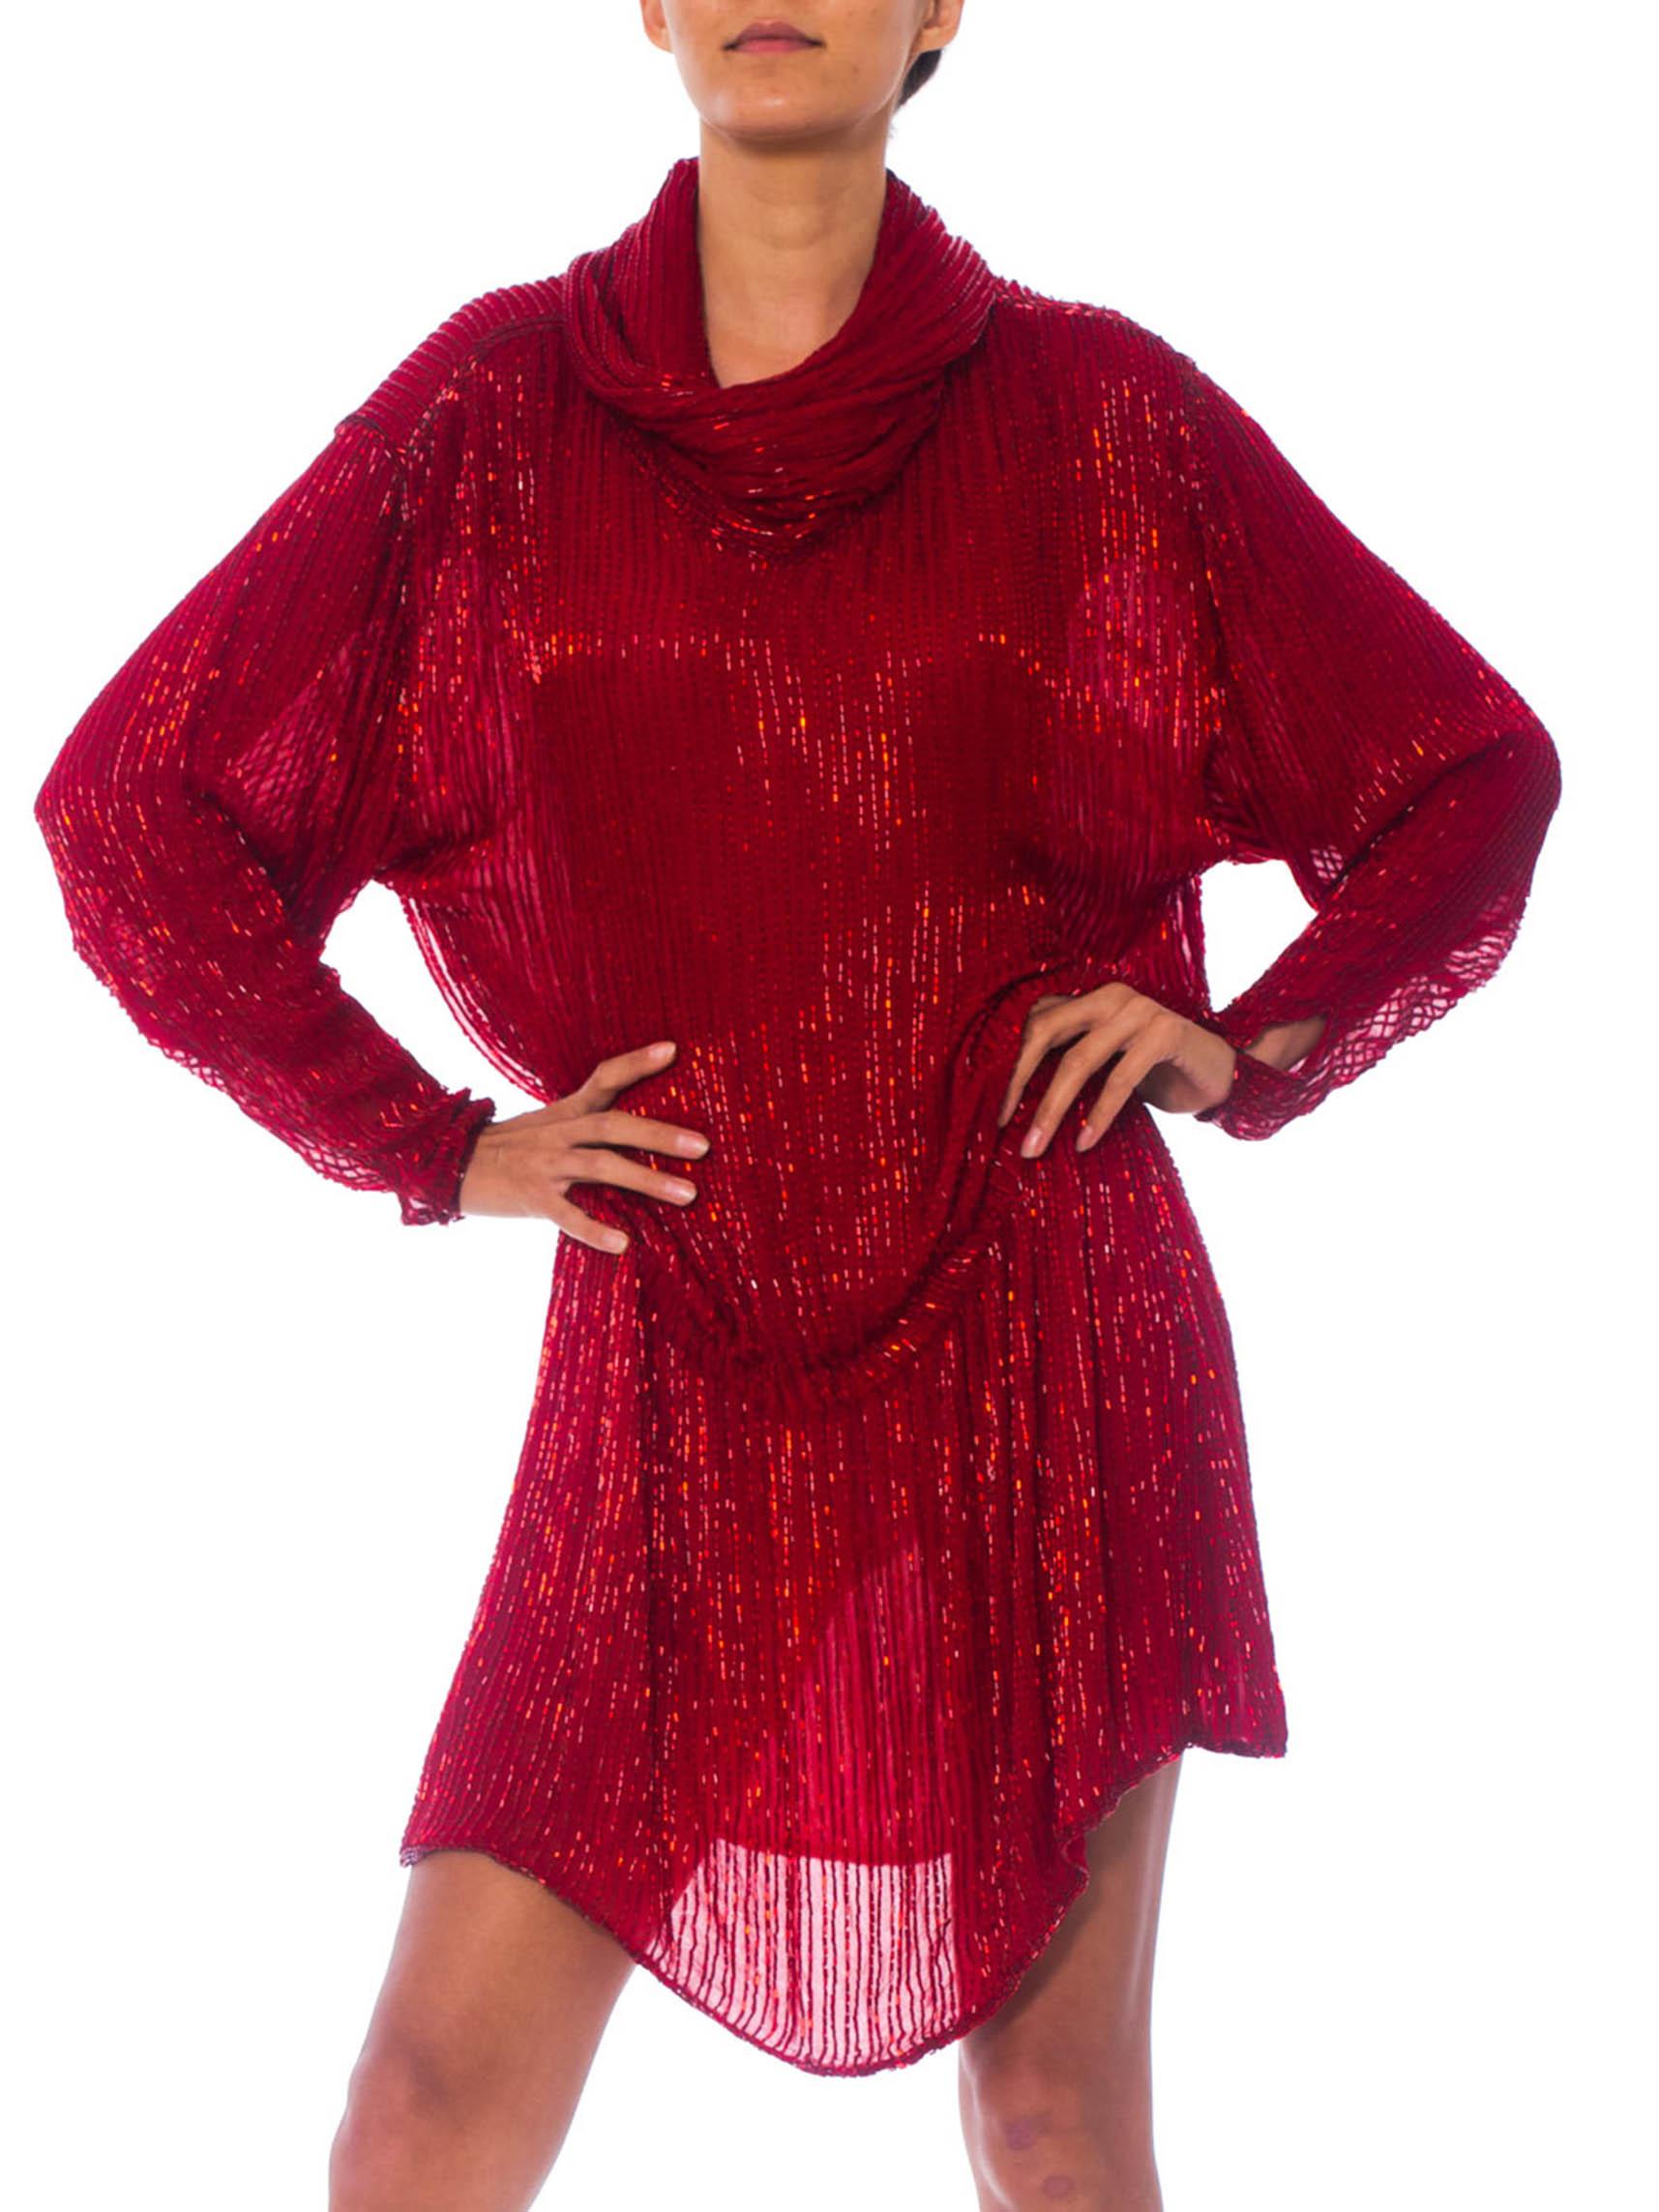 1970S HALSTON Red Silk Chiffon Oversized Mini Cocktail Dress Covered In Bugle Beads